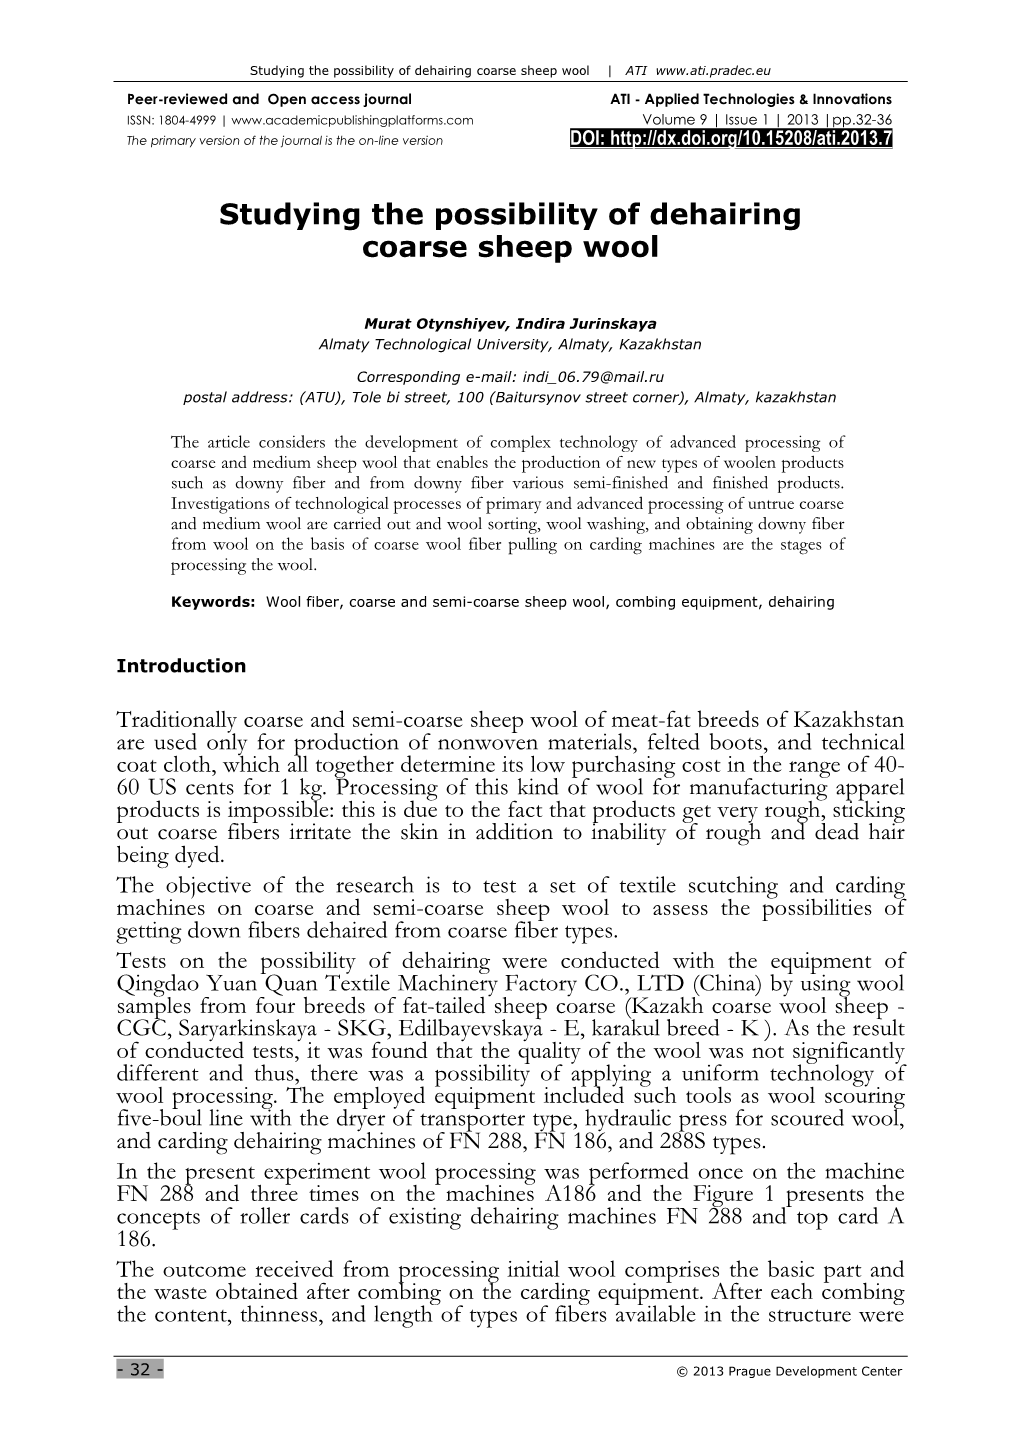 Studying the Possibility of Dehairing Coarse Sheep Wool | ATI